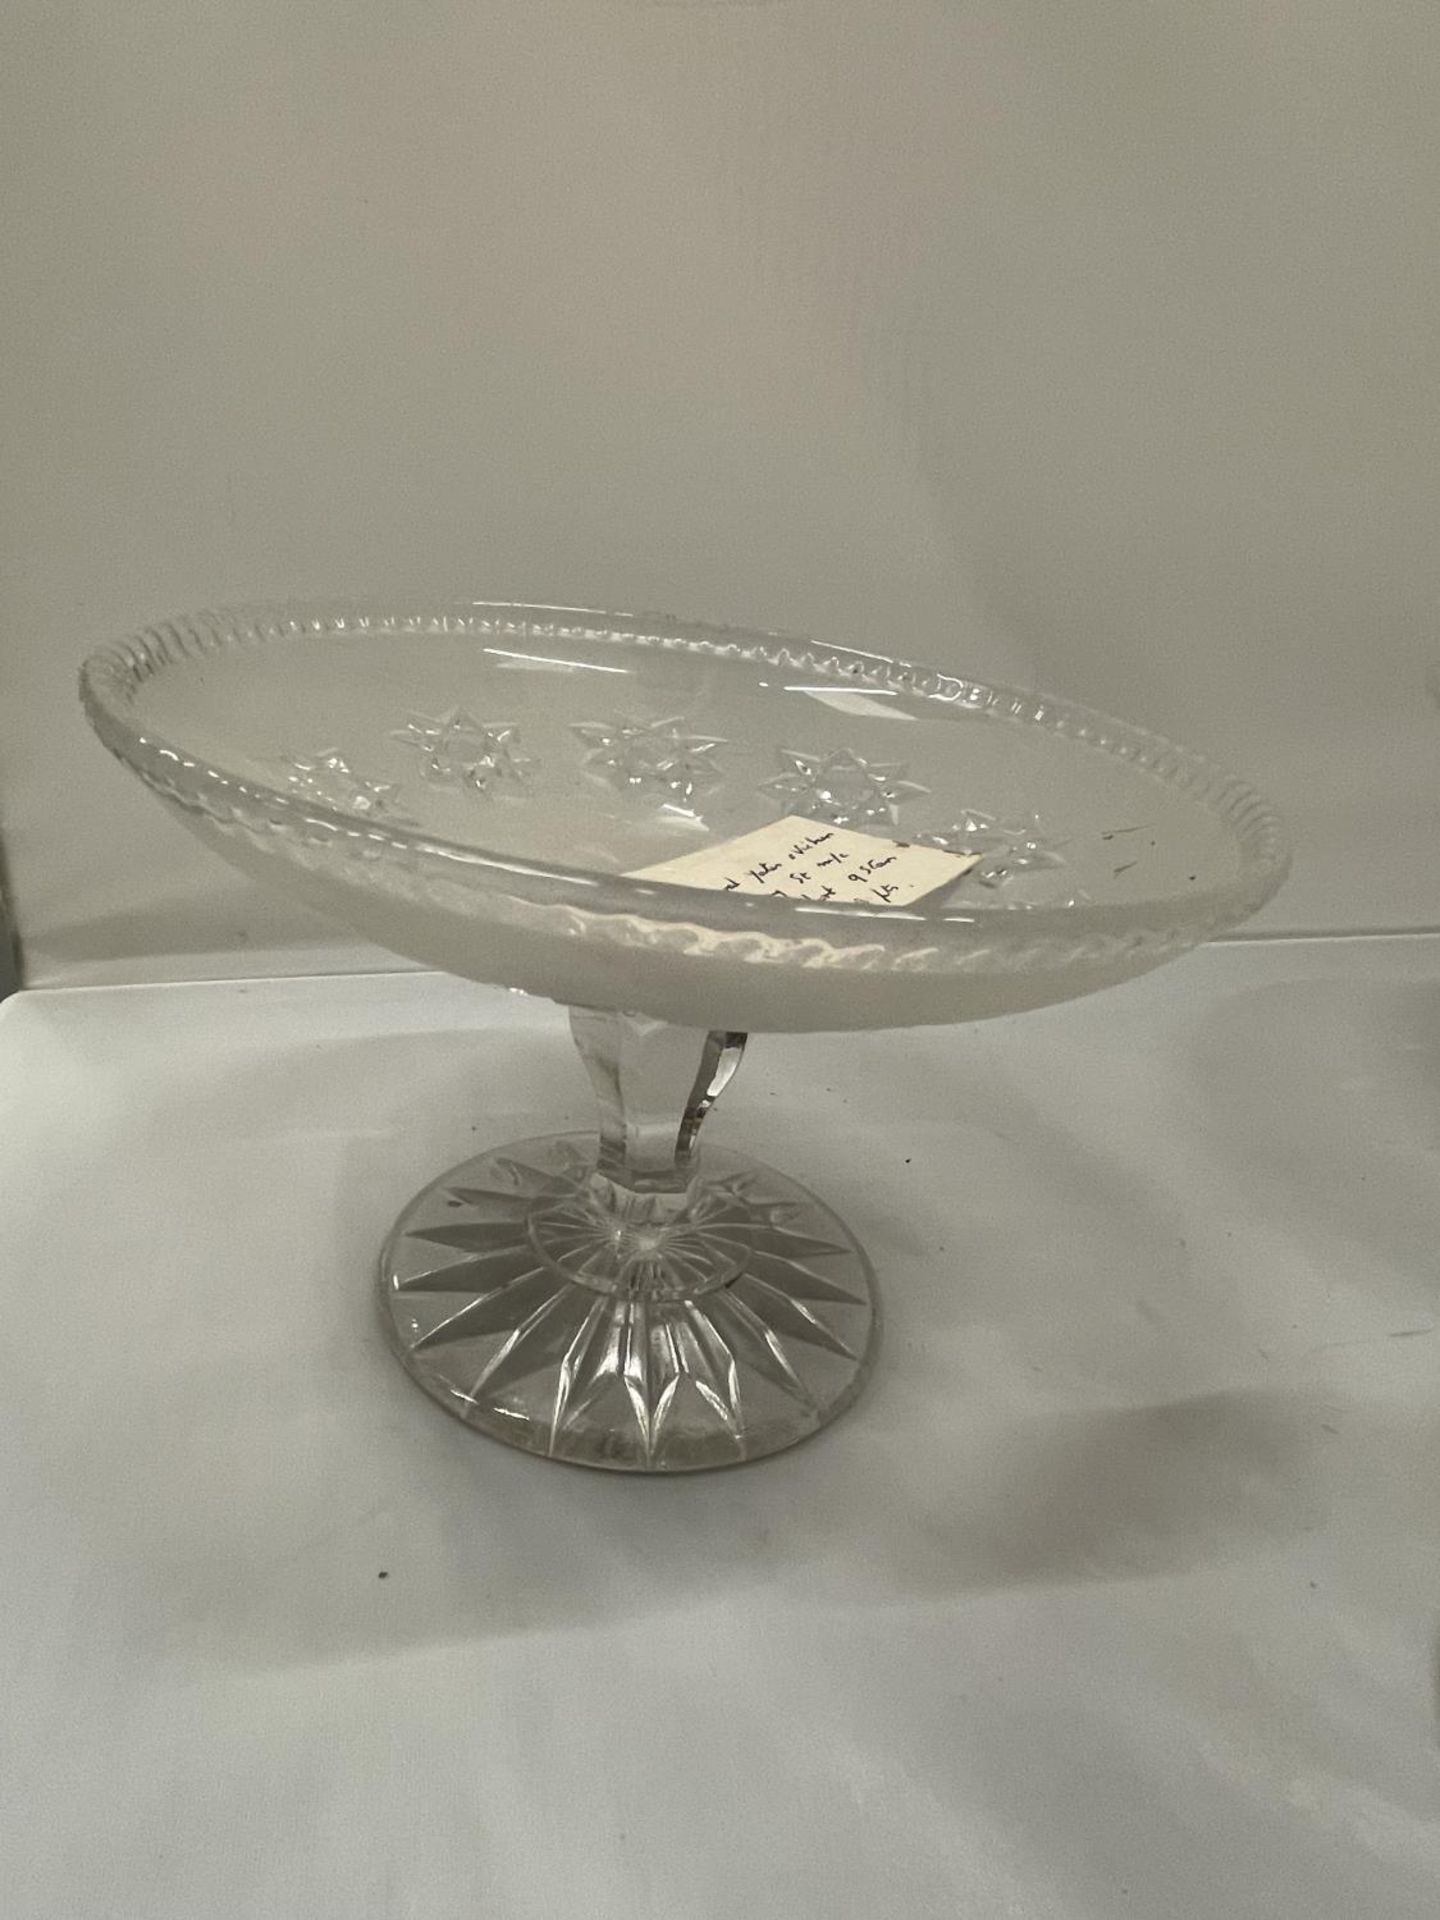 FOUR ITEMS OF PERCIVAL VICKERS GLASSWARE TO INCLUDE A HALLMARKED BIRMINGHAM SILVER LIDDED POT AND - Image 2 of 4